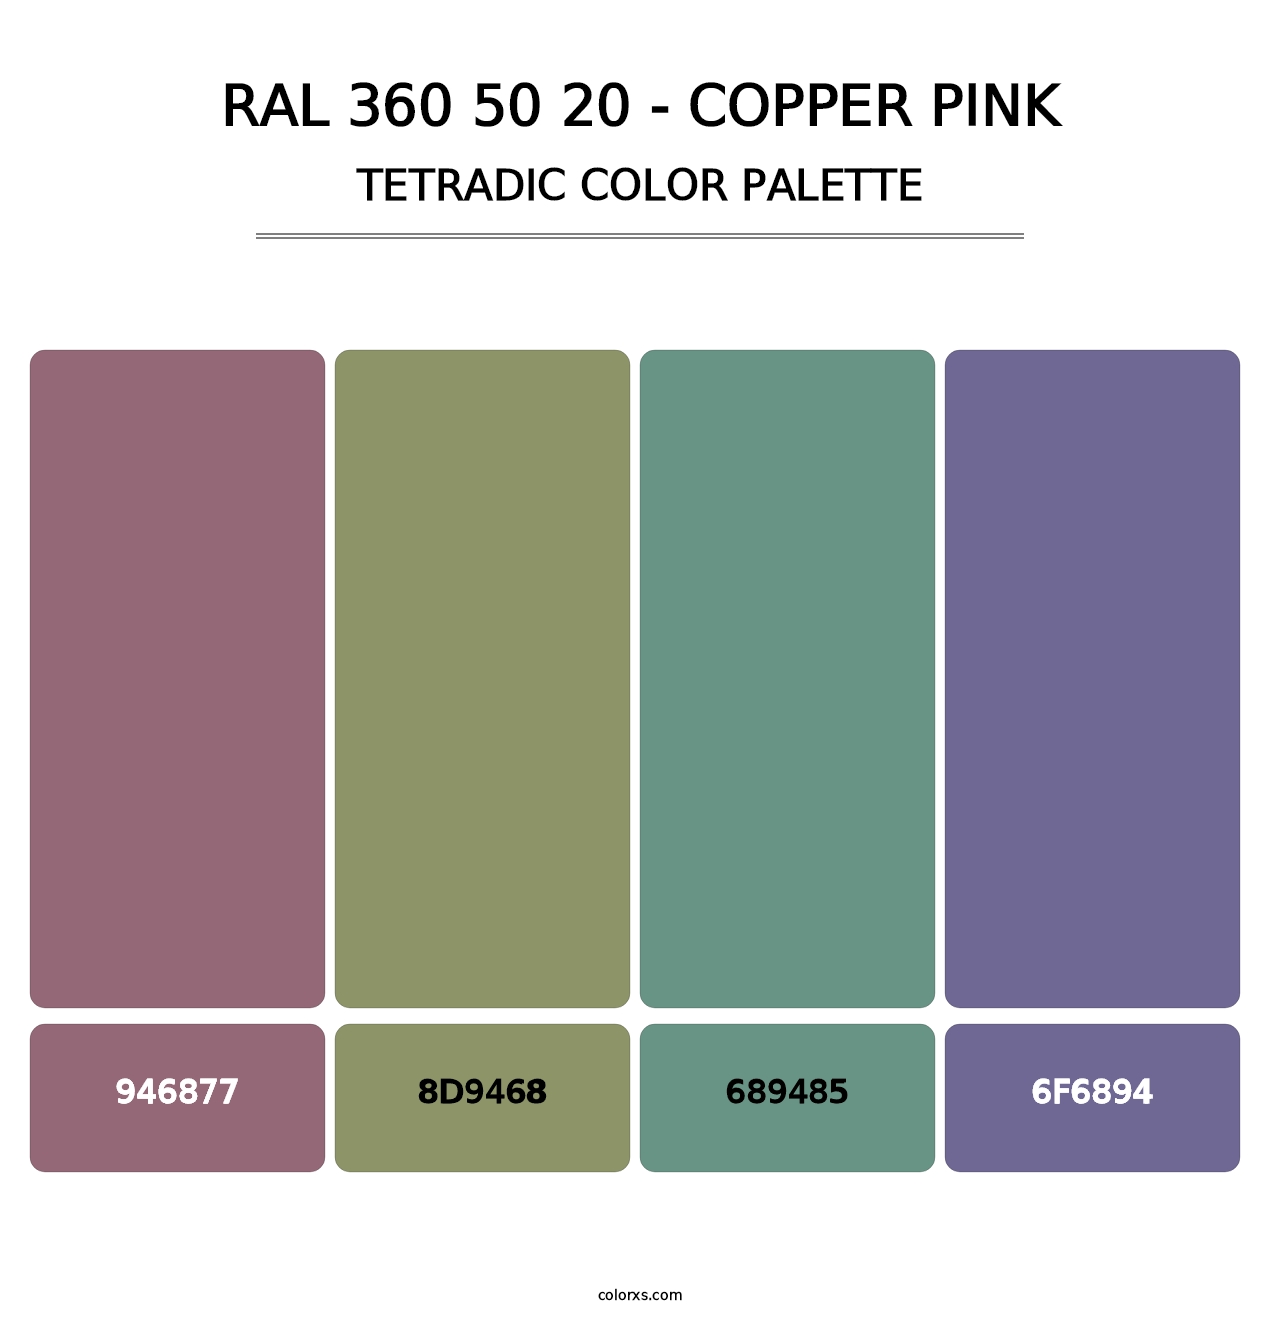 RAL 360 50 20 - Copper Pink - Tetradic Color Palette